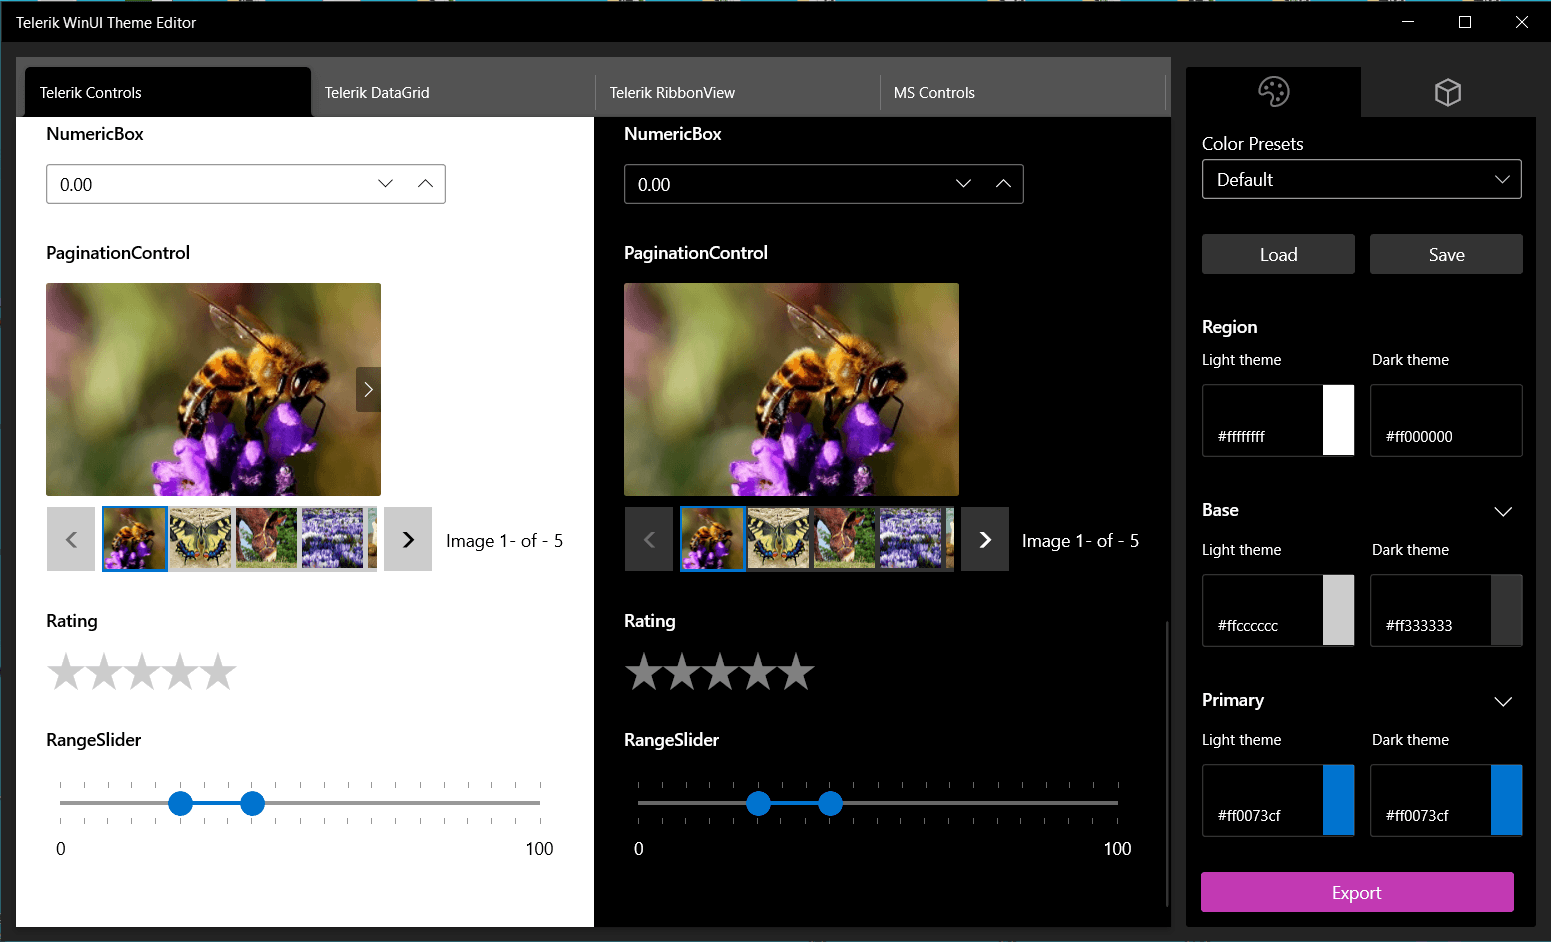 Telerik WinUI Theme Editor shows a light and a dark mode of the same page, with controls on the right choosing color presets.